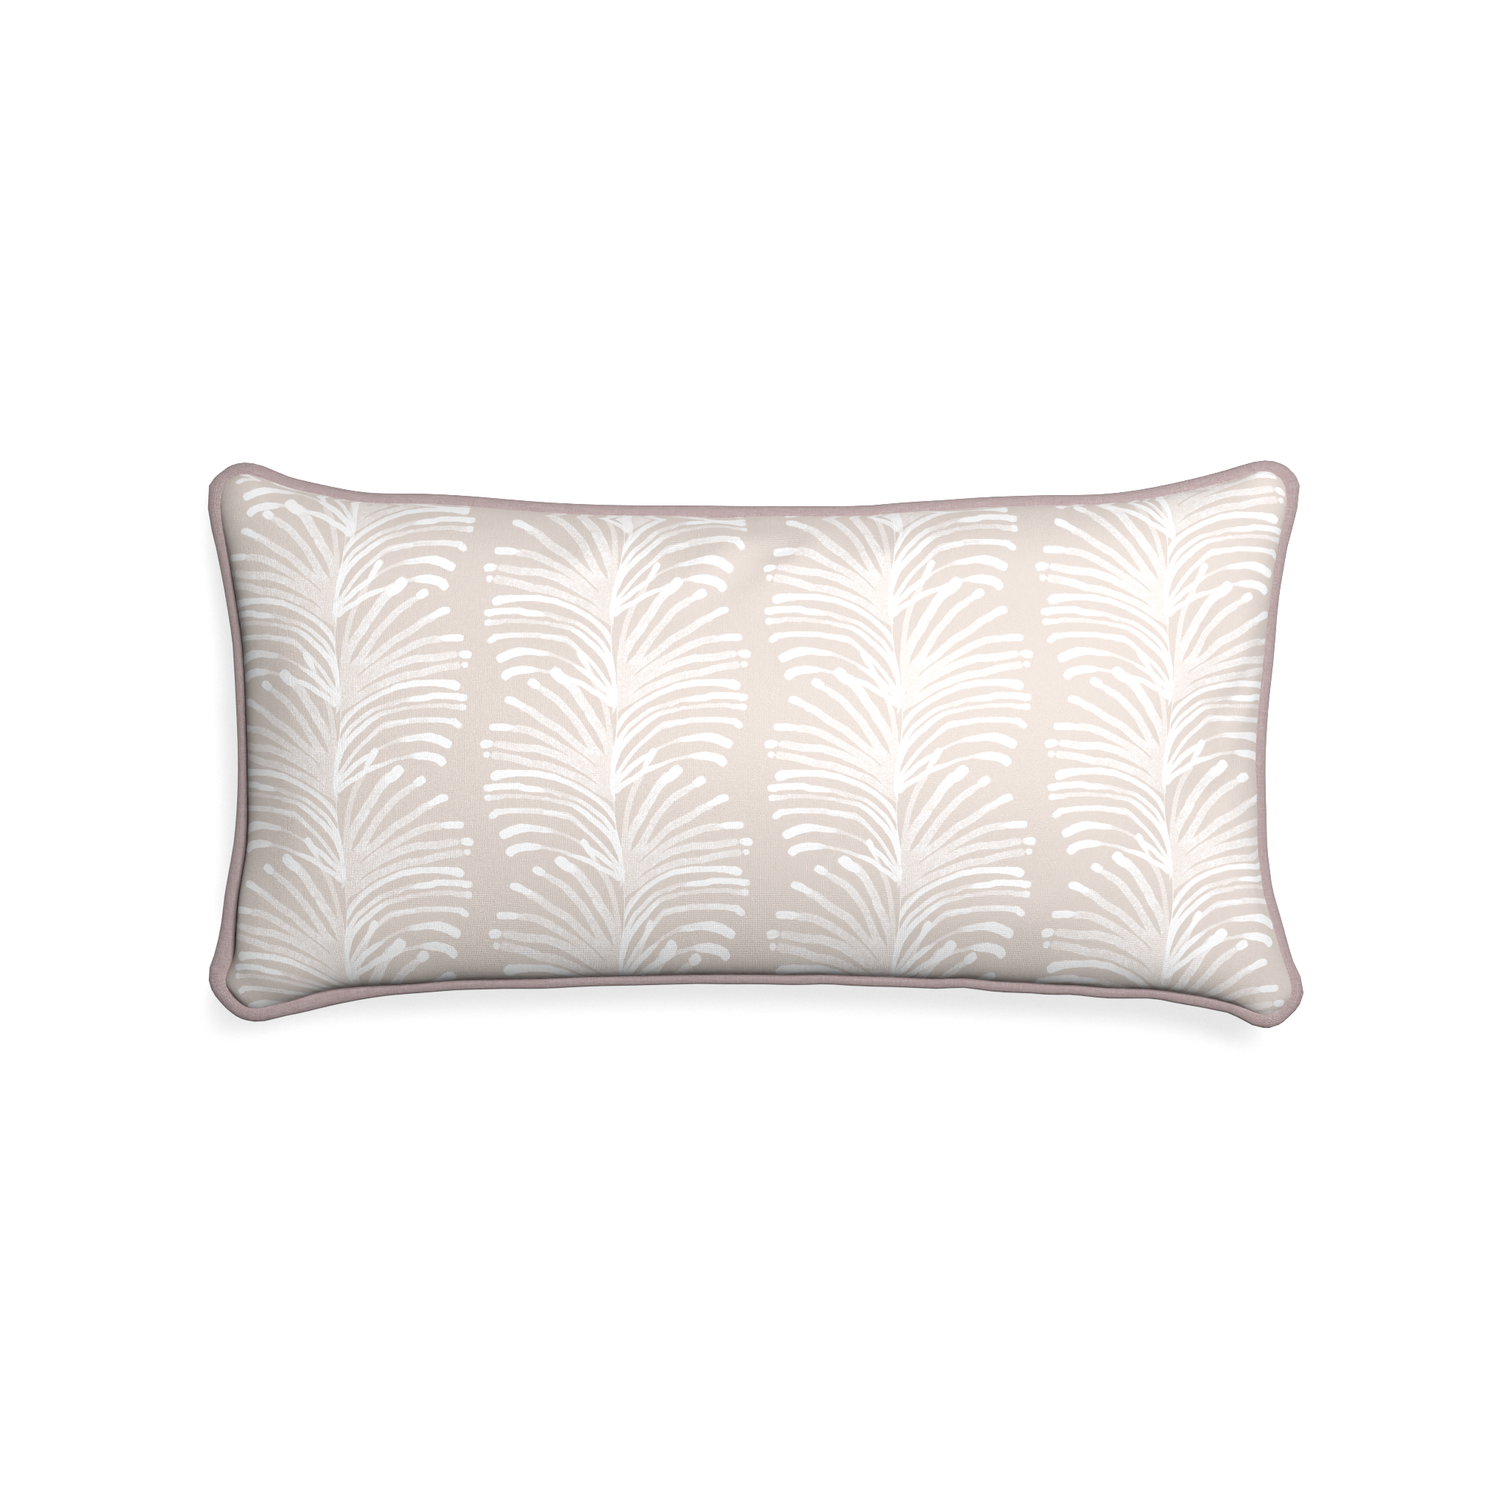 Midi-lumbar emma sand custom sand colored botanical stripepillow with orchid piping on white background